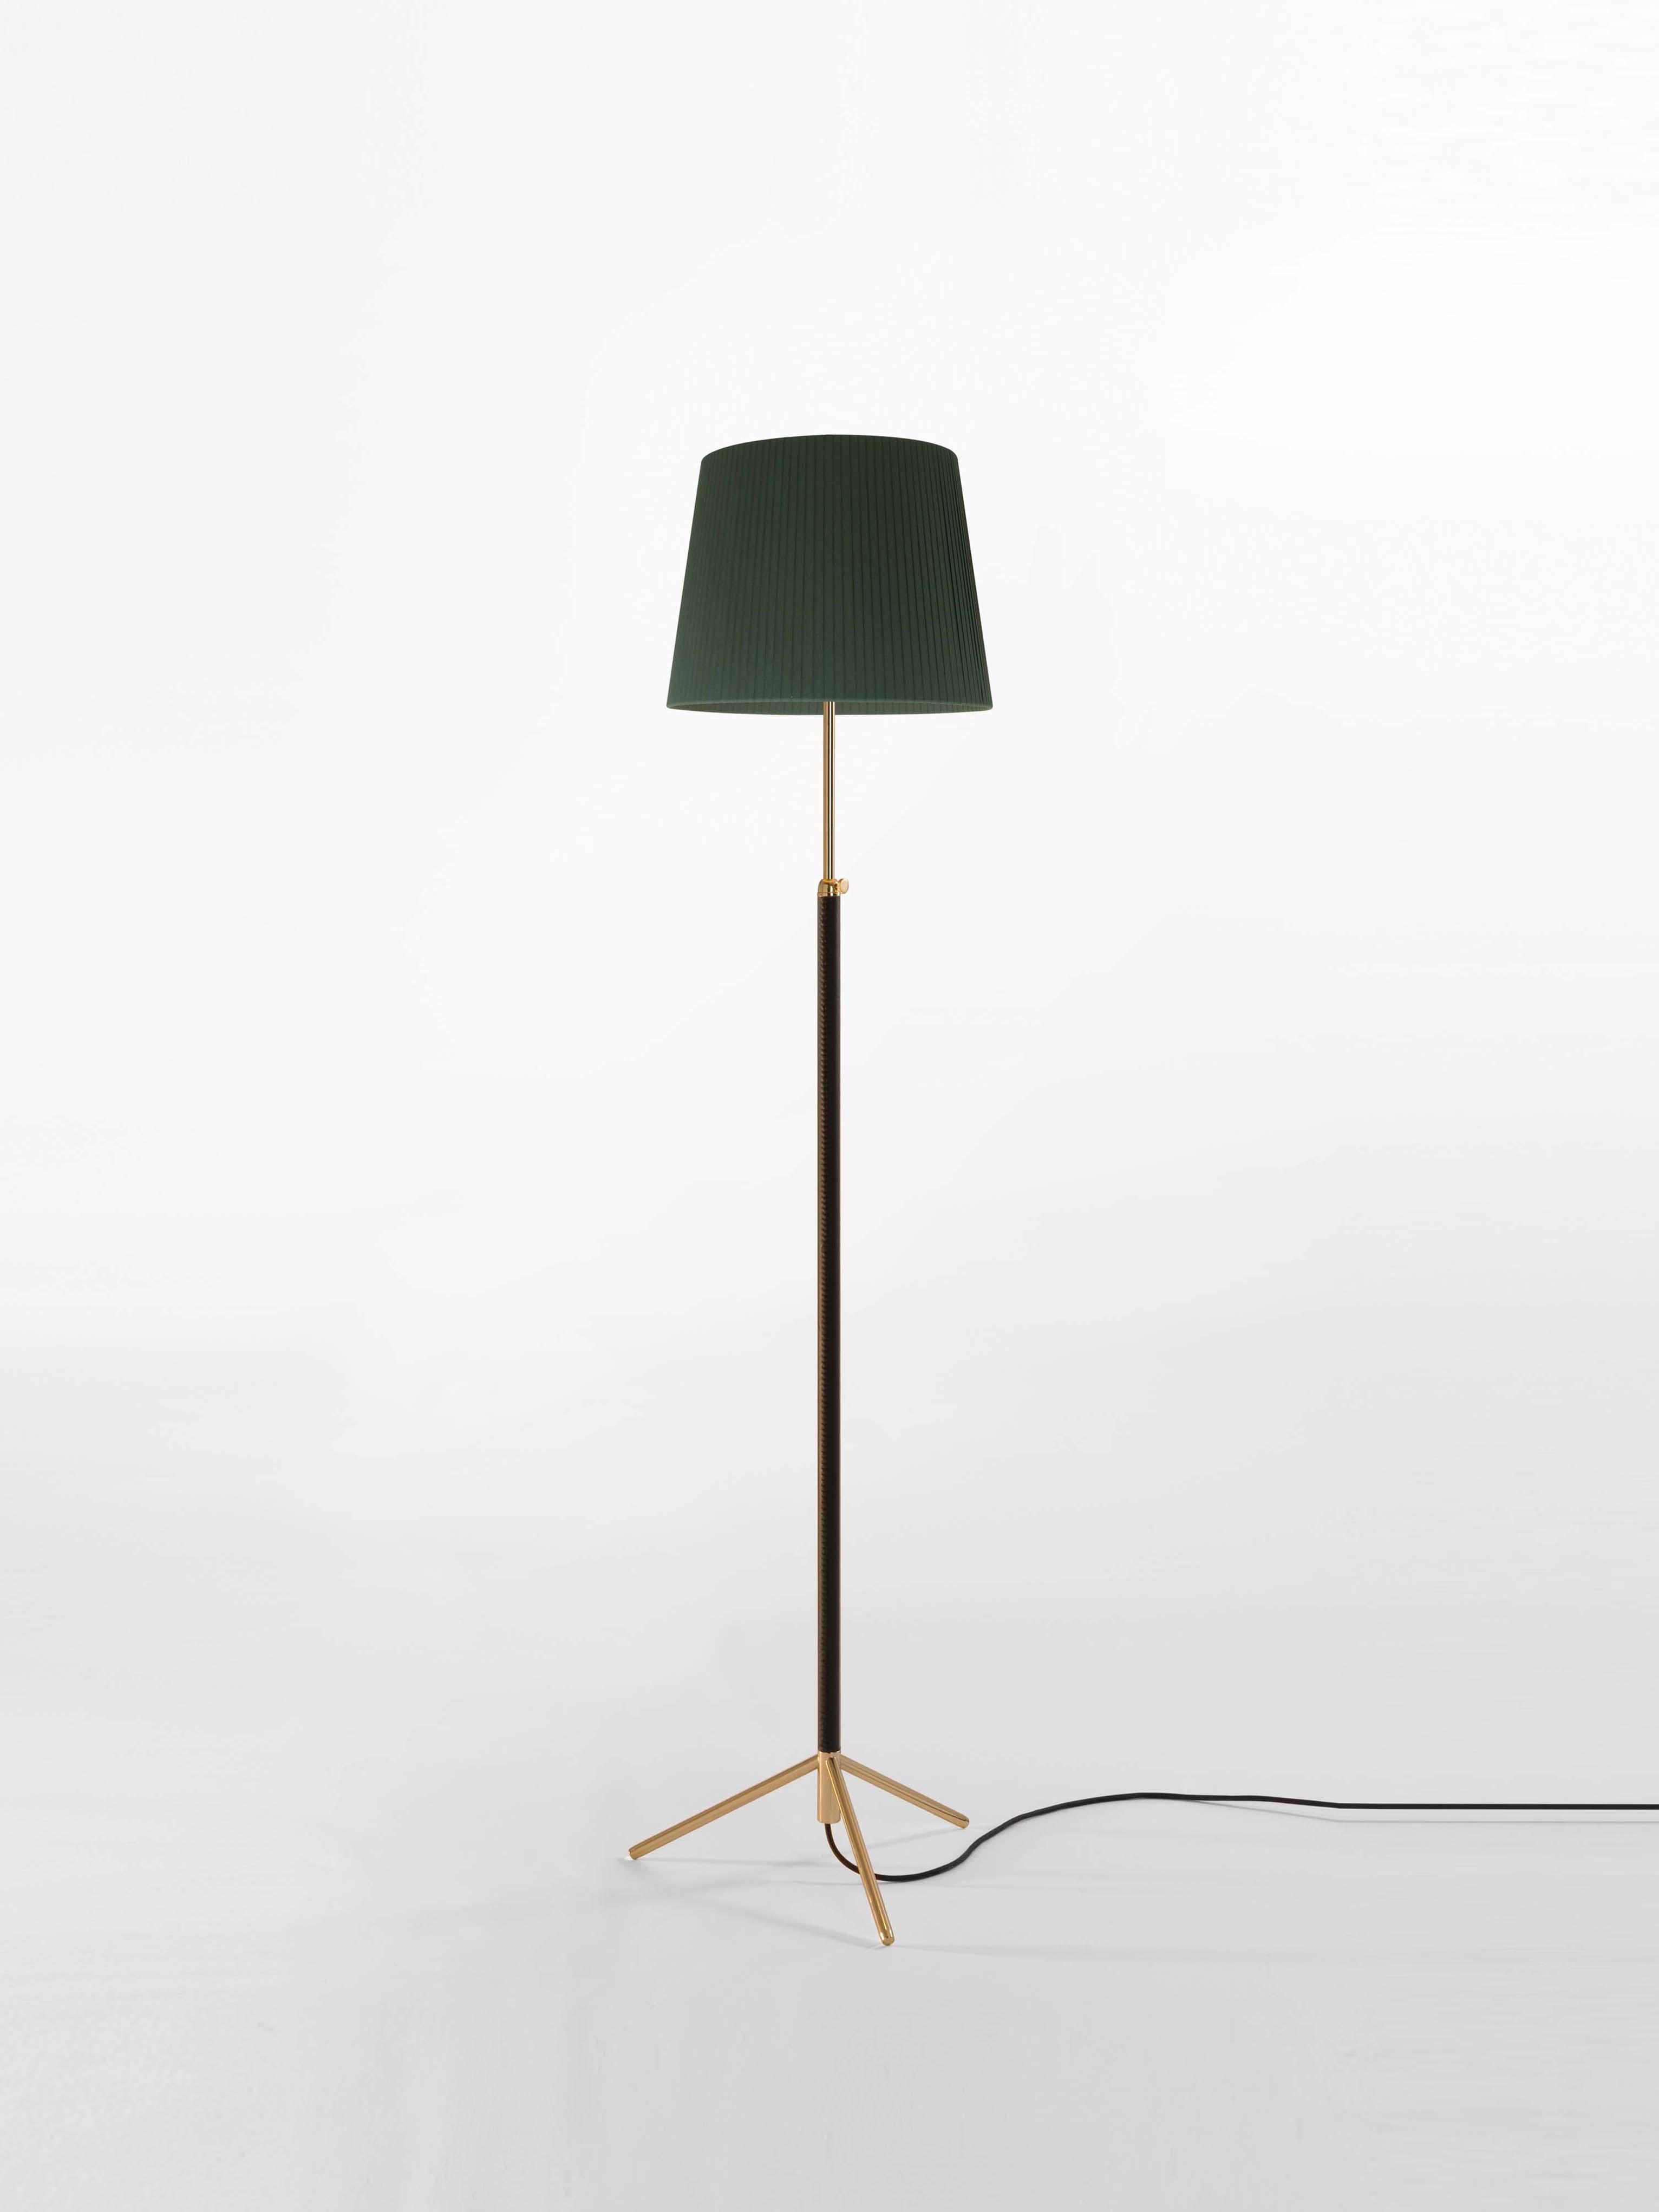 Green and brass Pie de Salón G3 floor lamp by Jaume Sans
Dimensions: d 40 x h 120-160 cm
Materials: Metal, leather, ribbon.
Available in chrome-plated or polished brass structure.
Available in other shade colors and sizes.

This slender